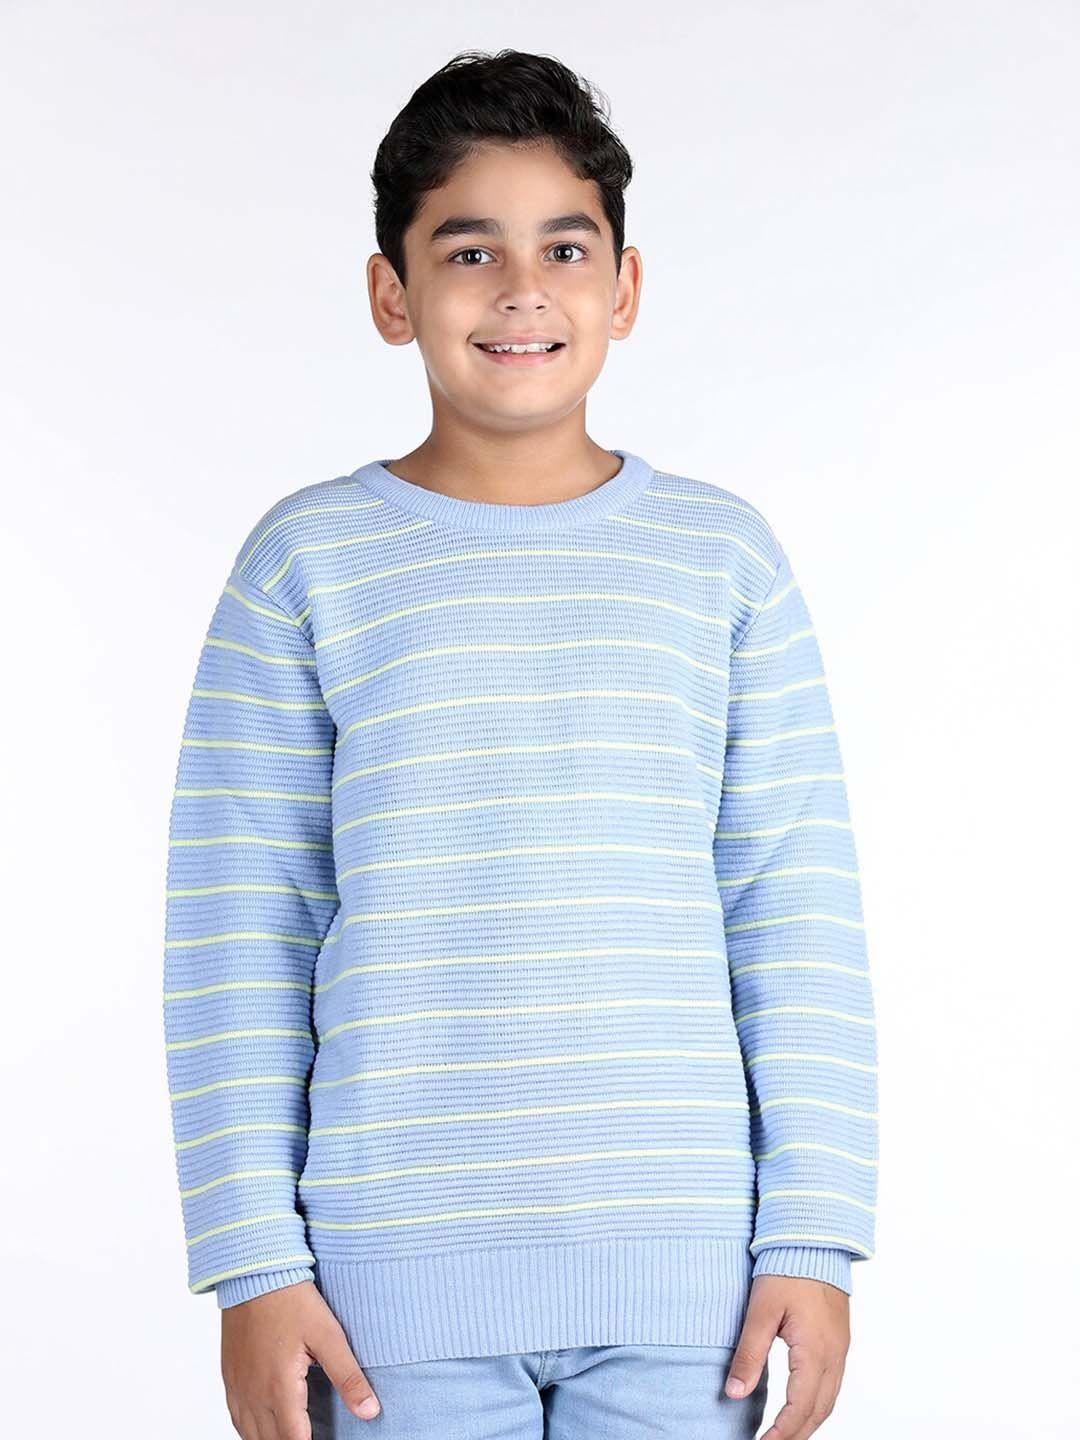 wingsfield-boys-striped-acrylic-pullover-sweaters